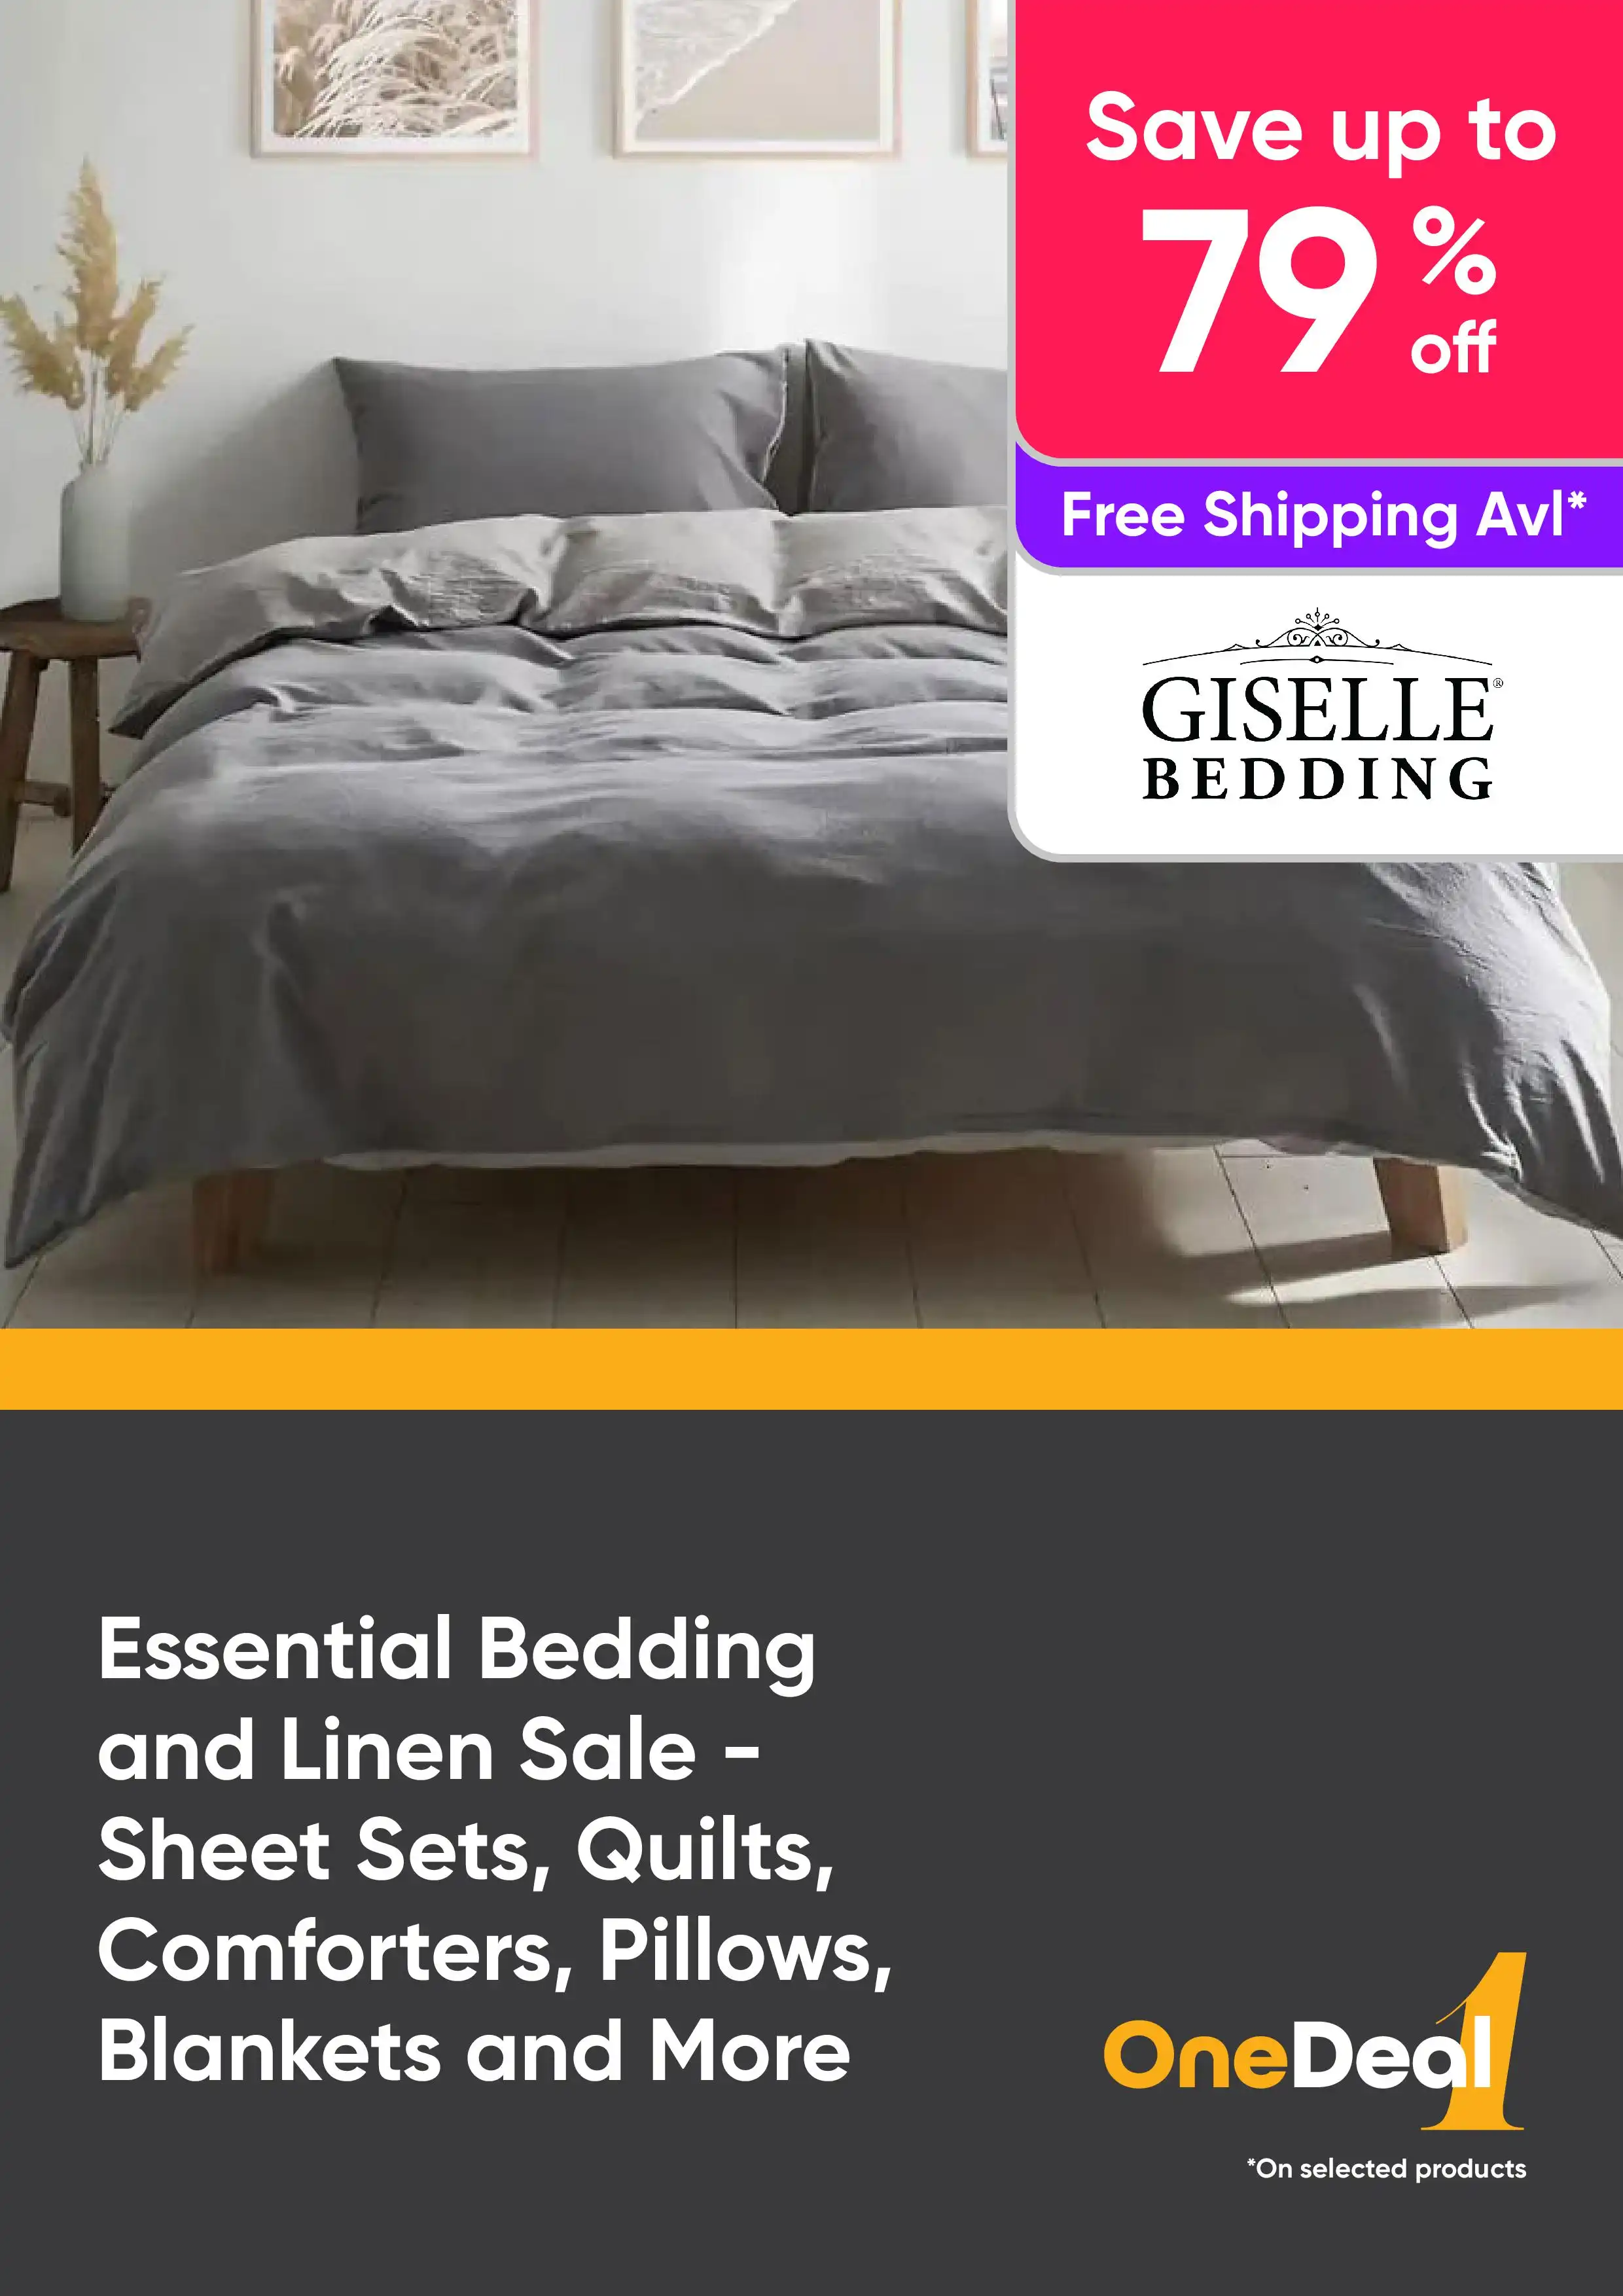 Essential Bedding and Linen Sale - Shop Sheet Sets, Quilts, Comforters, Pillows, Blankets and More - Save up to 79% Off